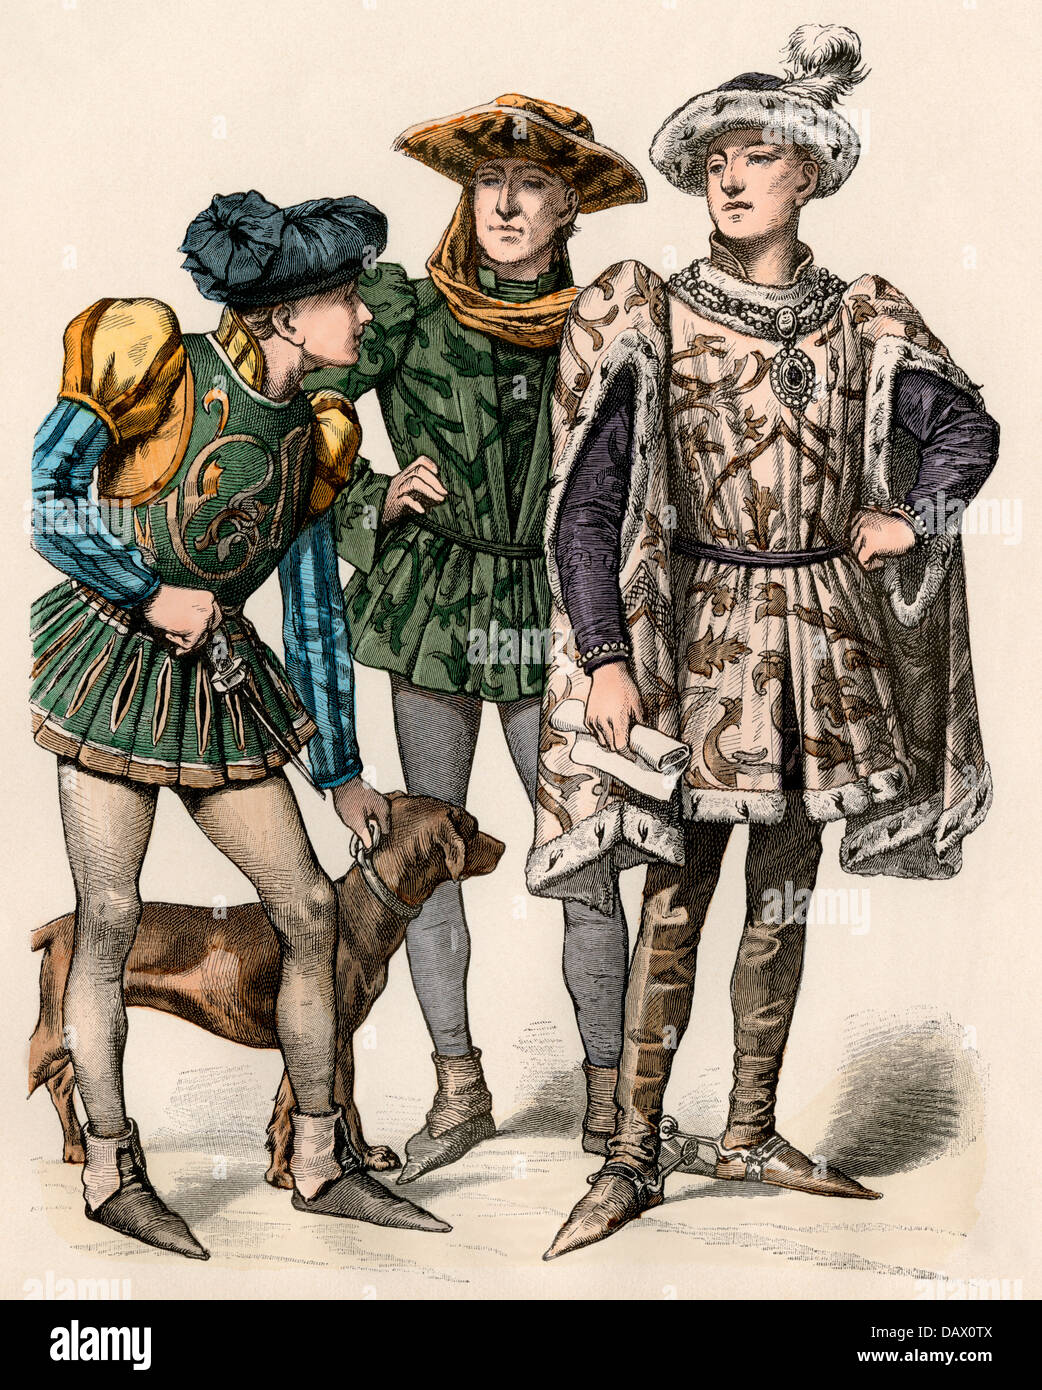 Charles the Bold, Duke of Burgundy (right), with his attendants, 1400s. Hand-colored print Stock Photo